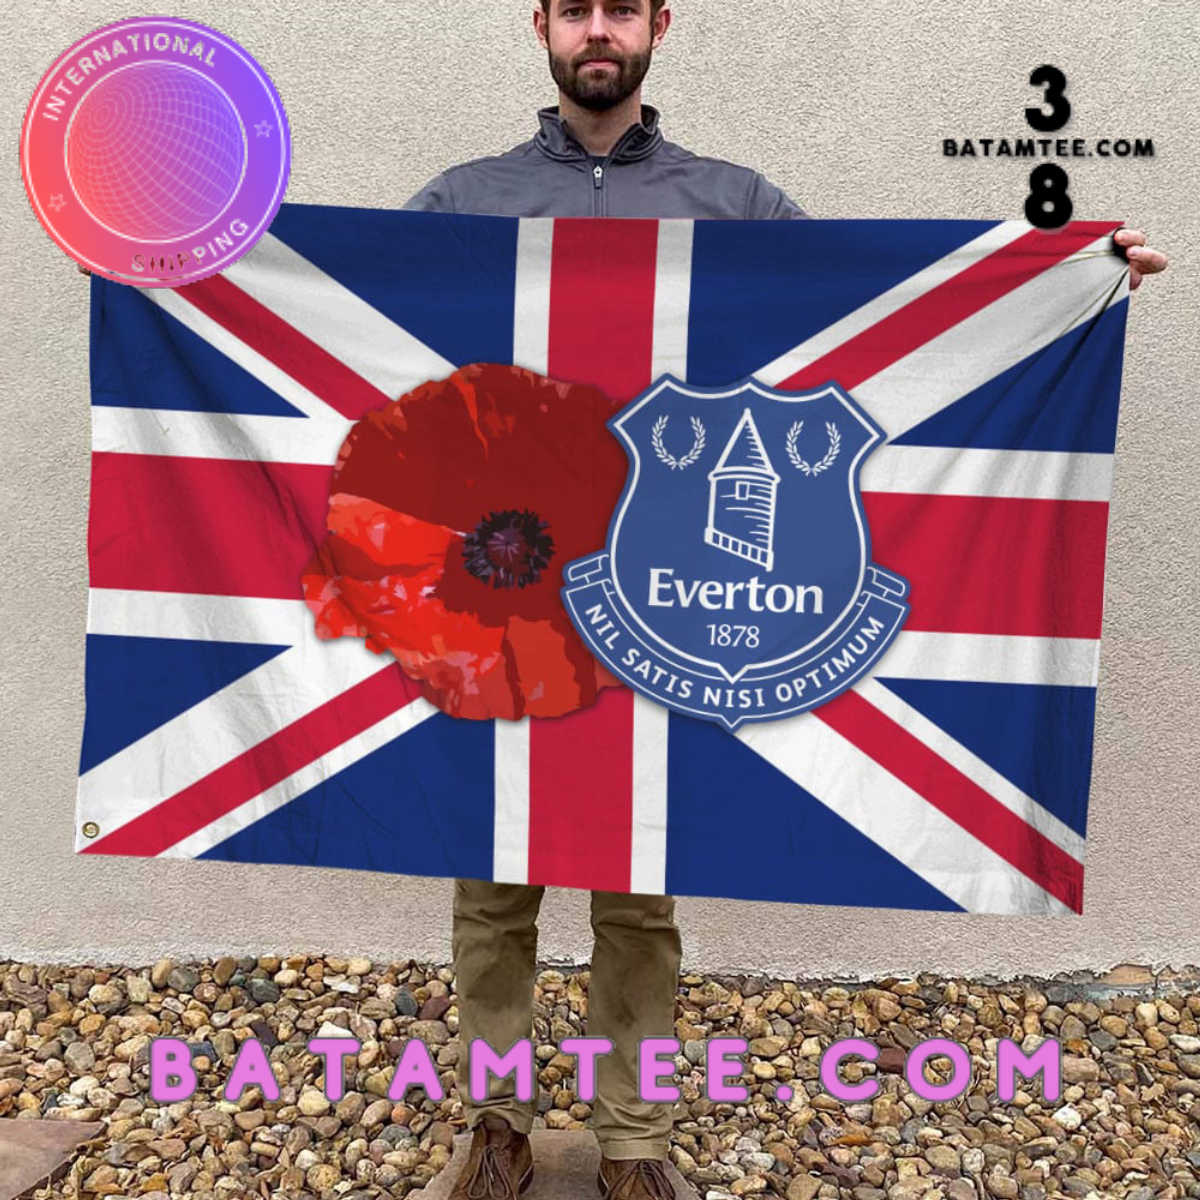 New House Everton FC flag Remembrance day collection